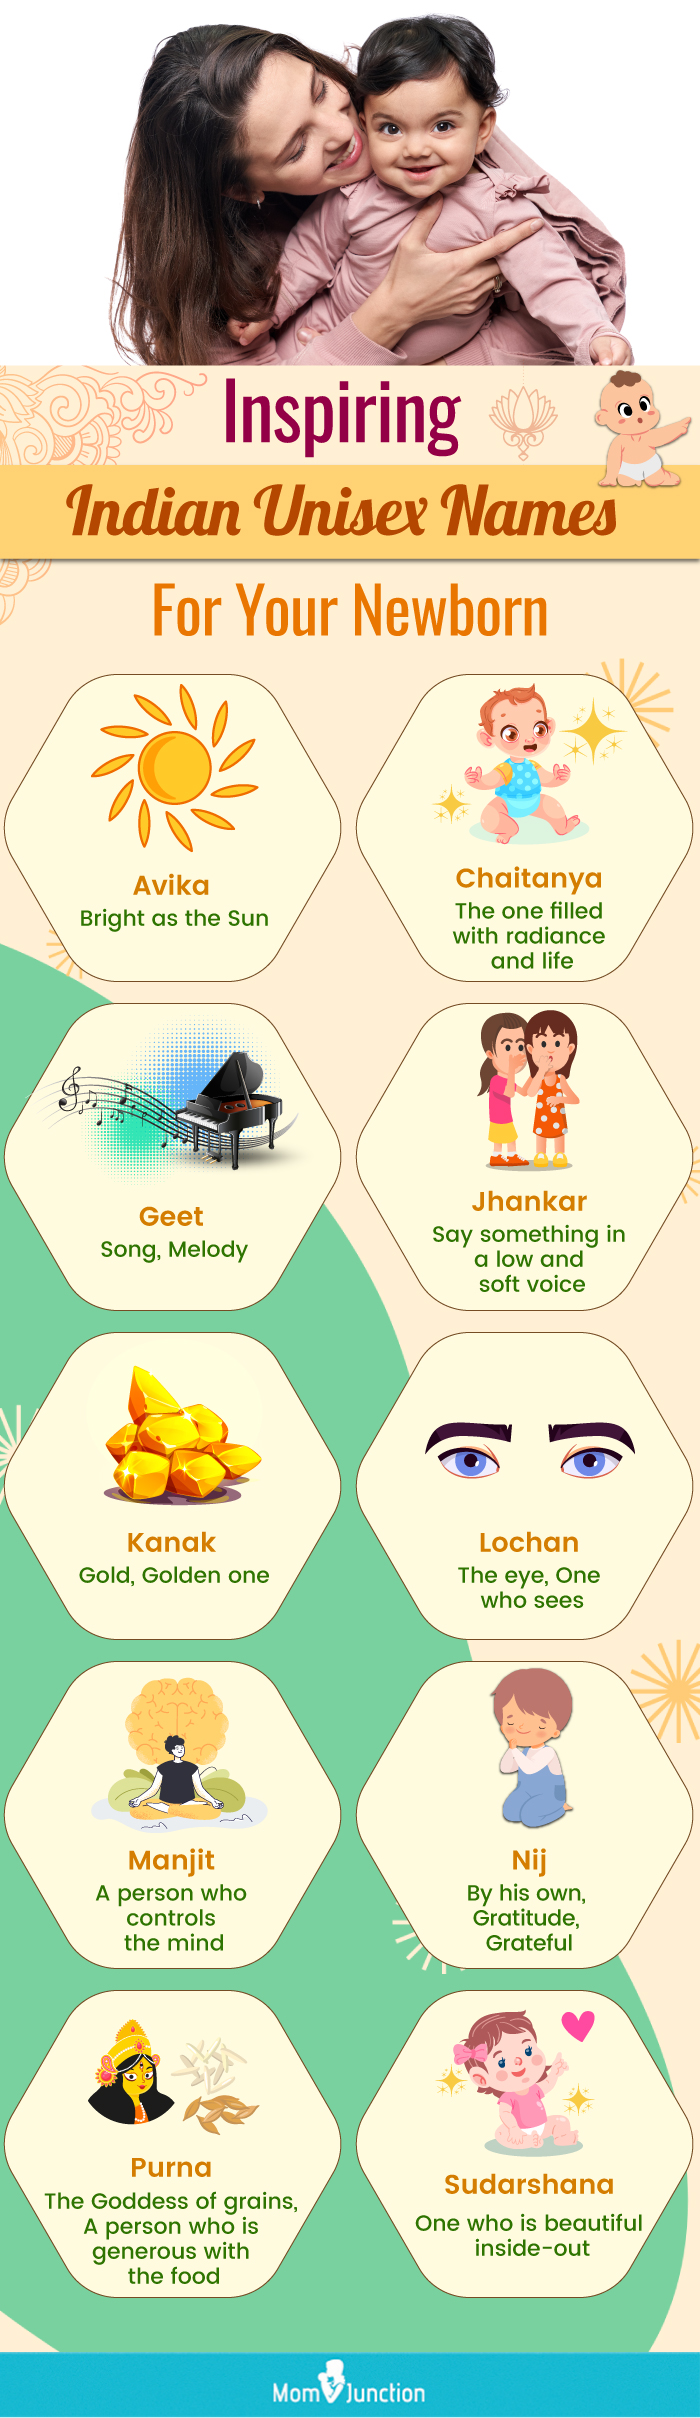 inspiring indian unisex names for your newborn (infographic)